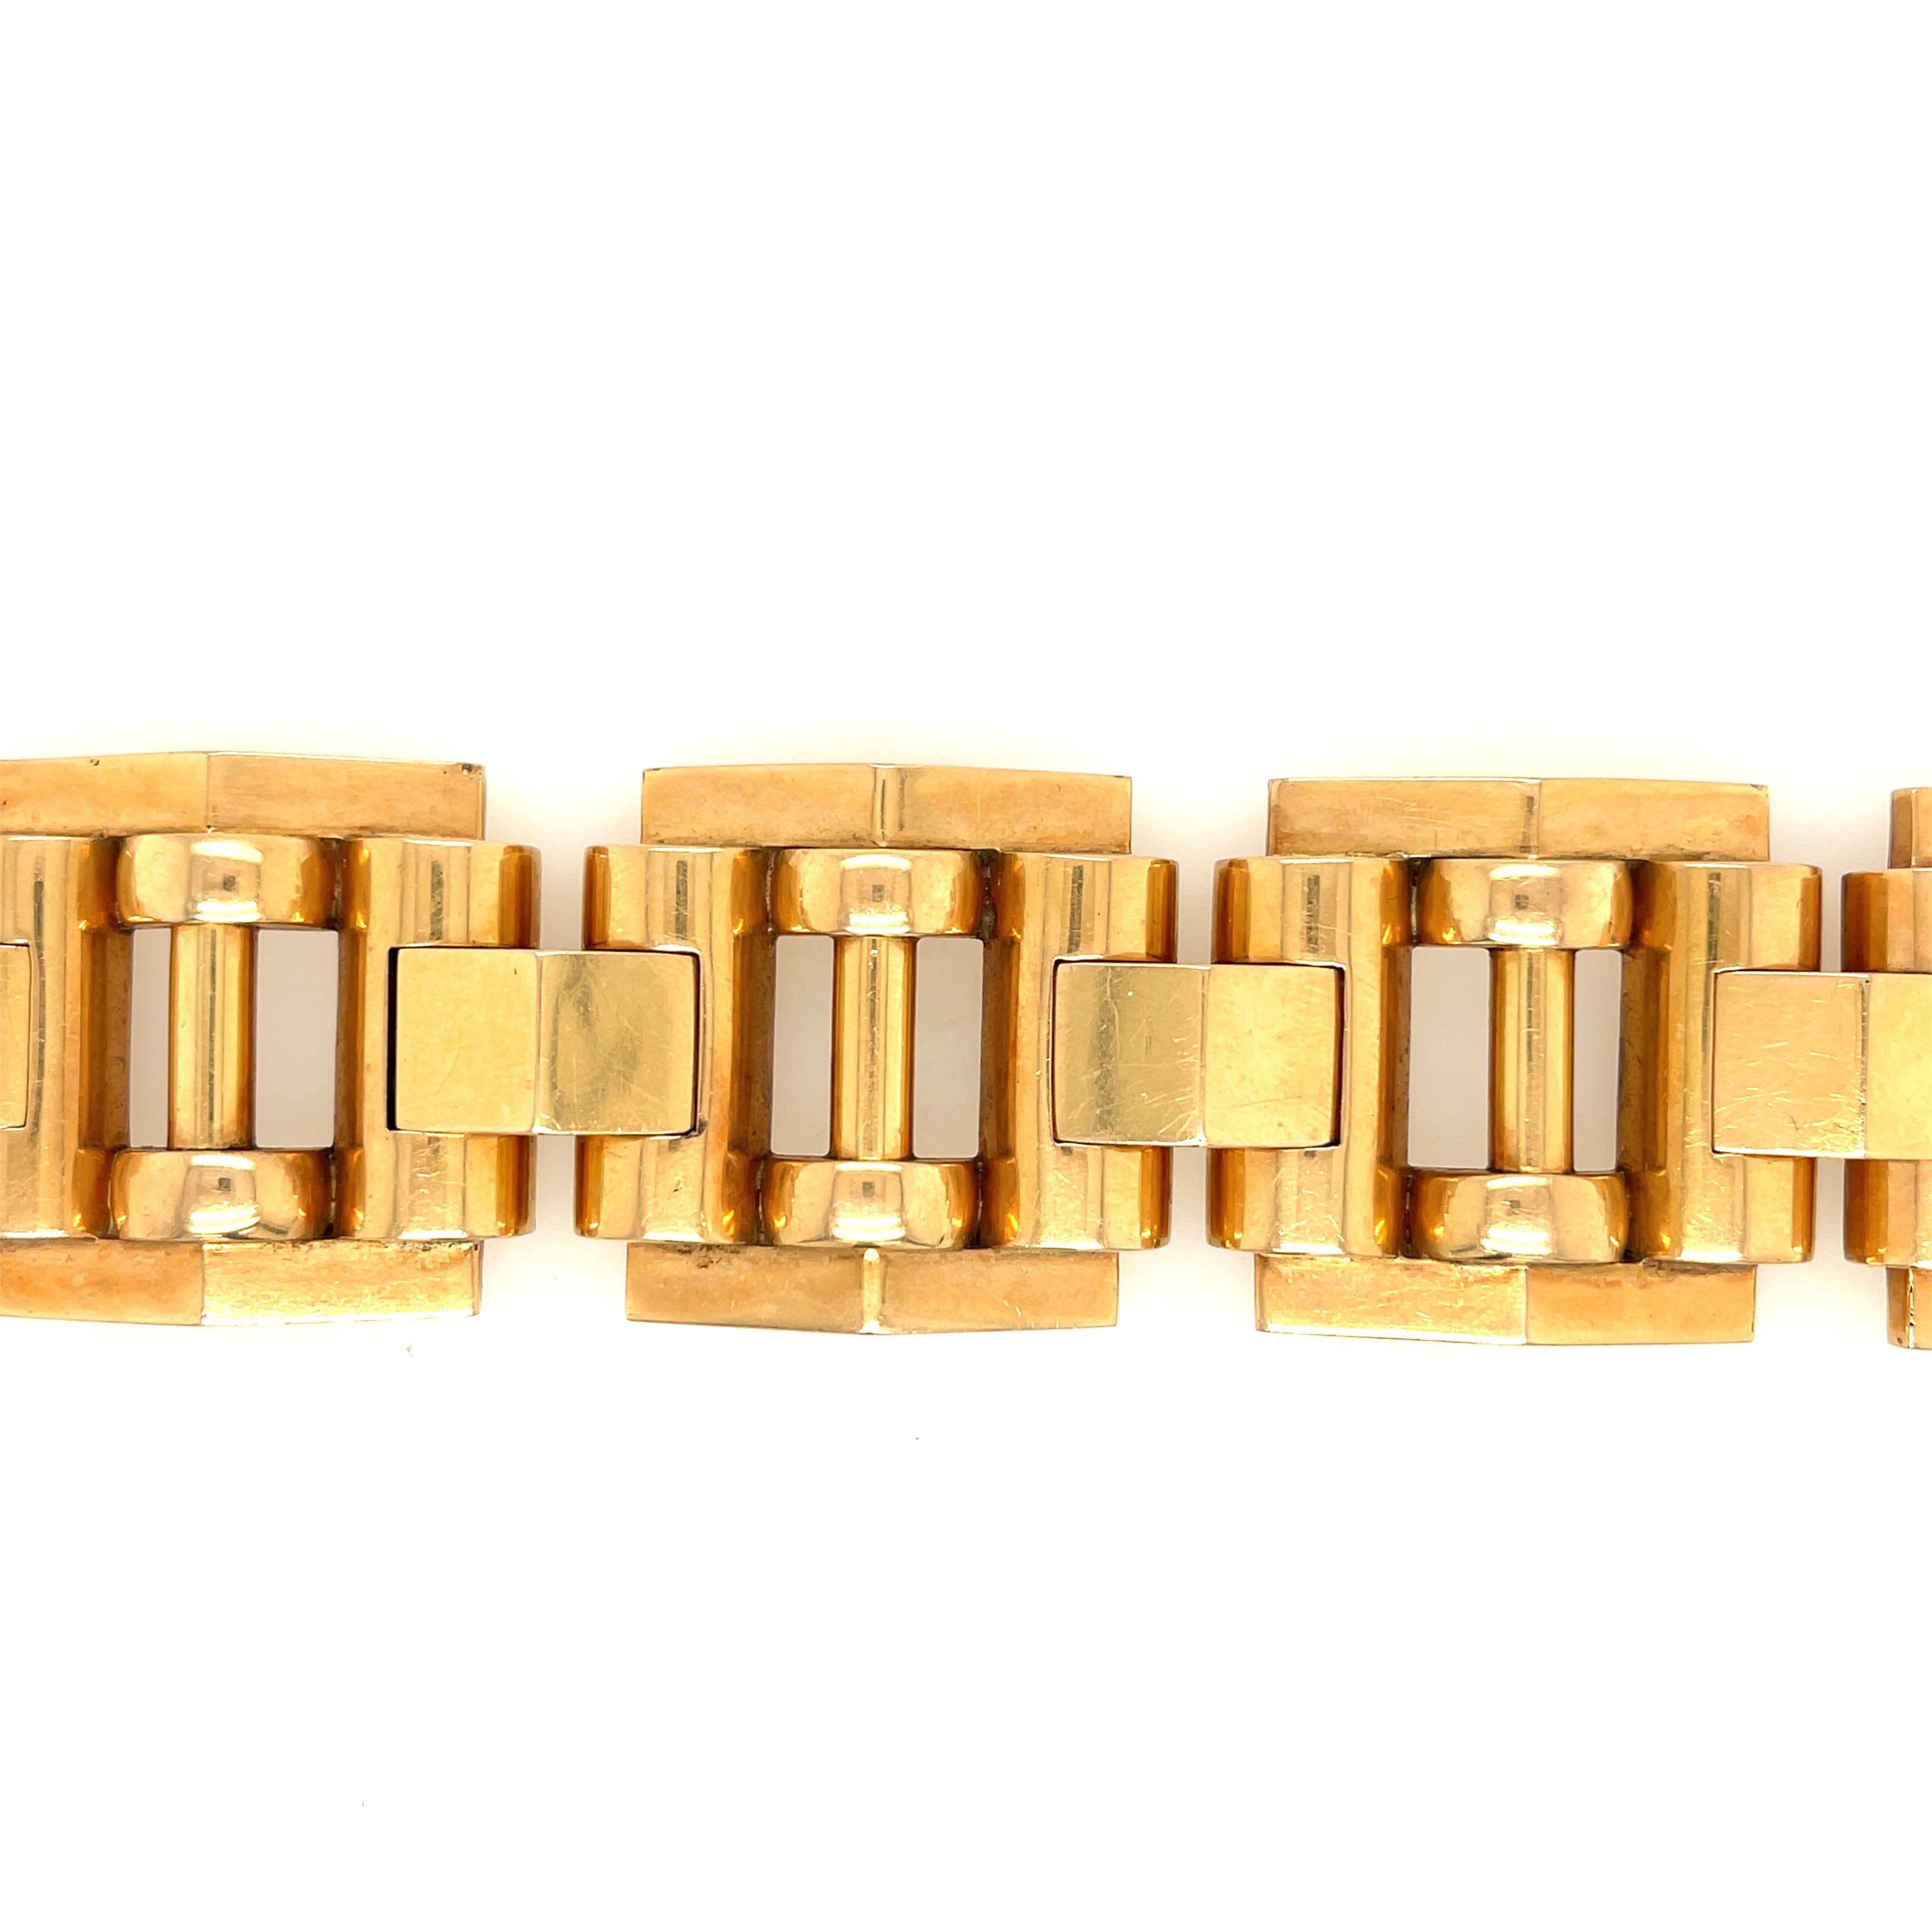 A bold 18k yellow gold Retro tank link bracelet circa 1940. This bracelet has a nice dimensional link and is a nice wide bracelet. Such bracelets are referred to Tank bracelets because during WWII when these bracelets were quite popular they were